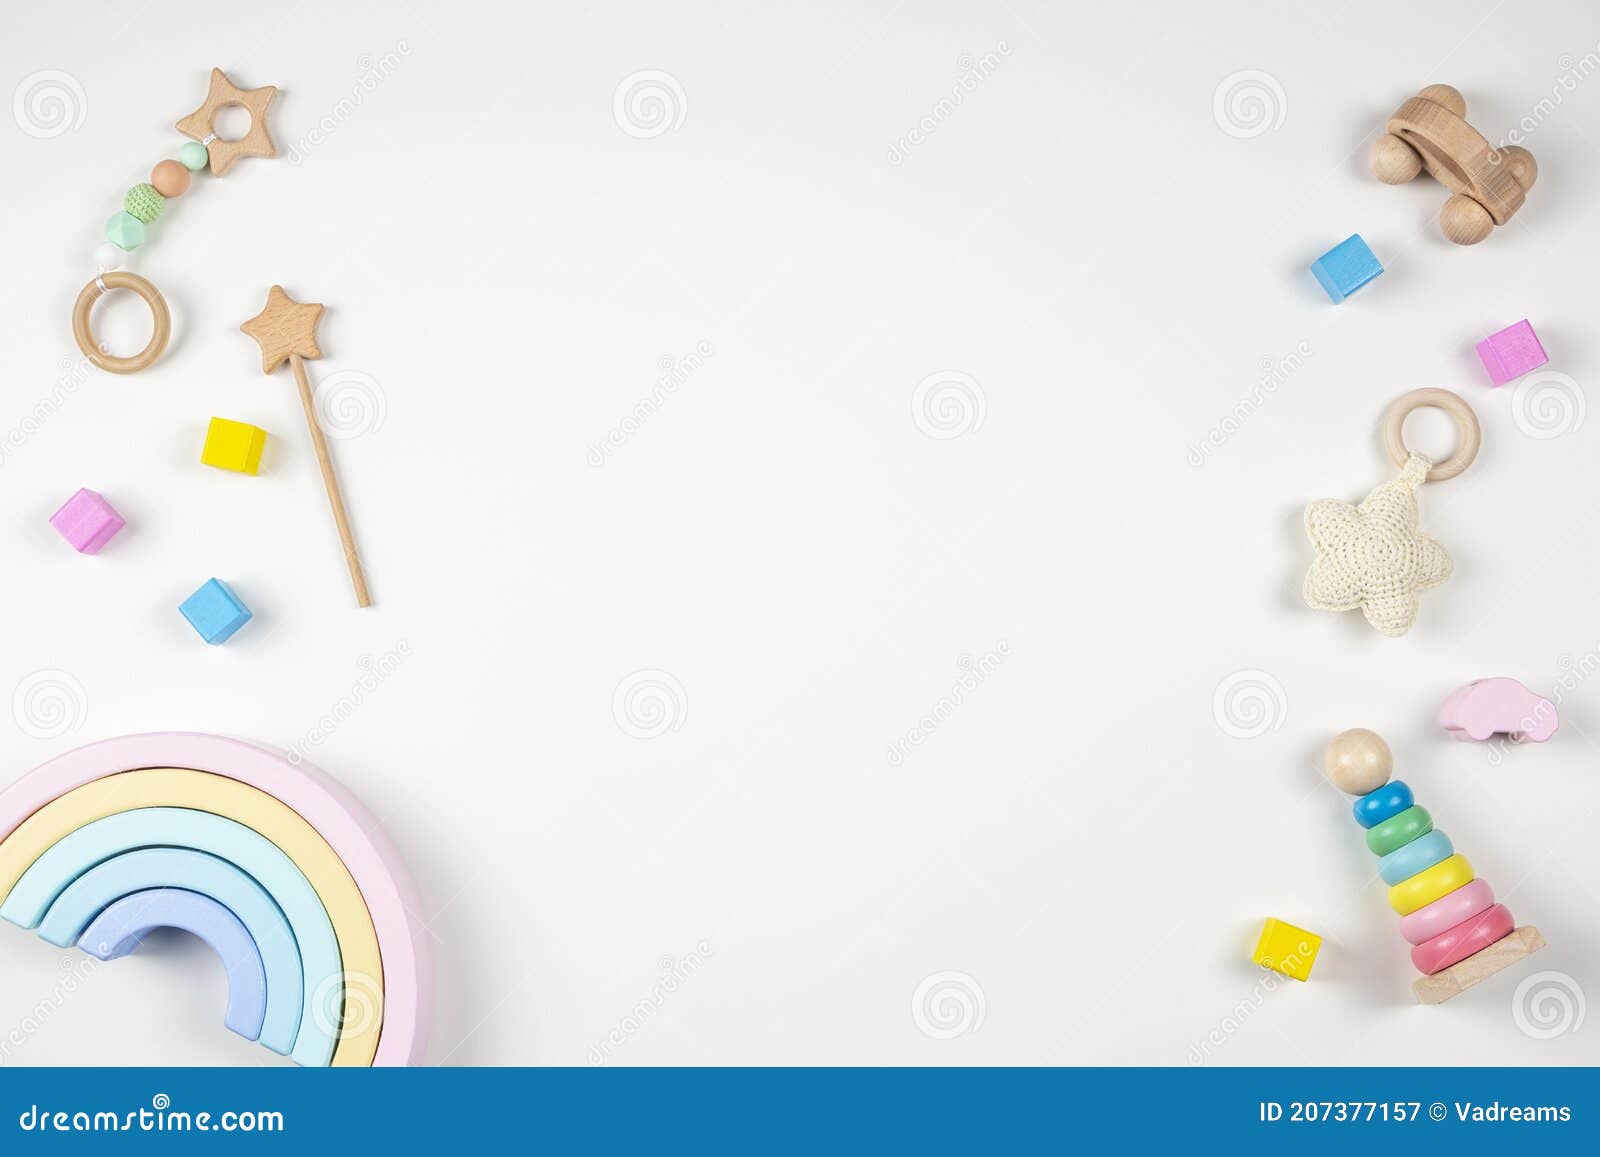 baby kids toys frame on white background. top view. flat lay. copy space for text